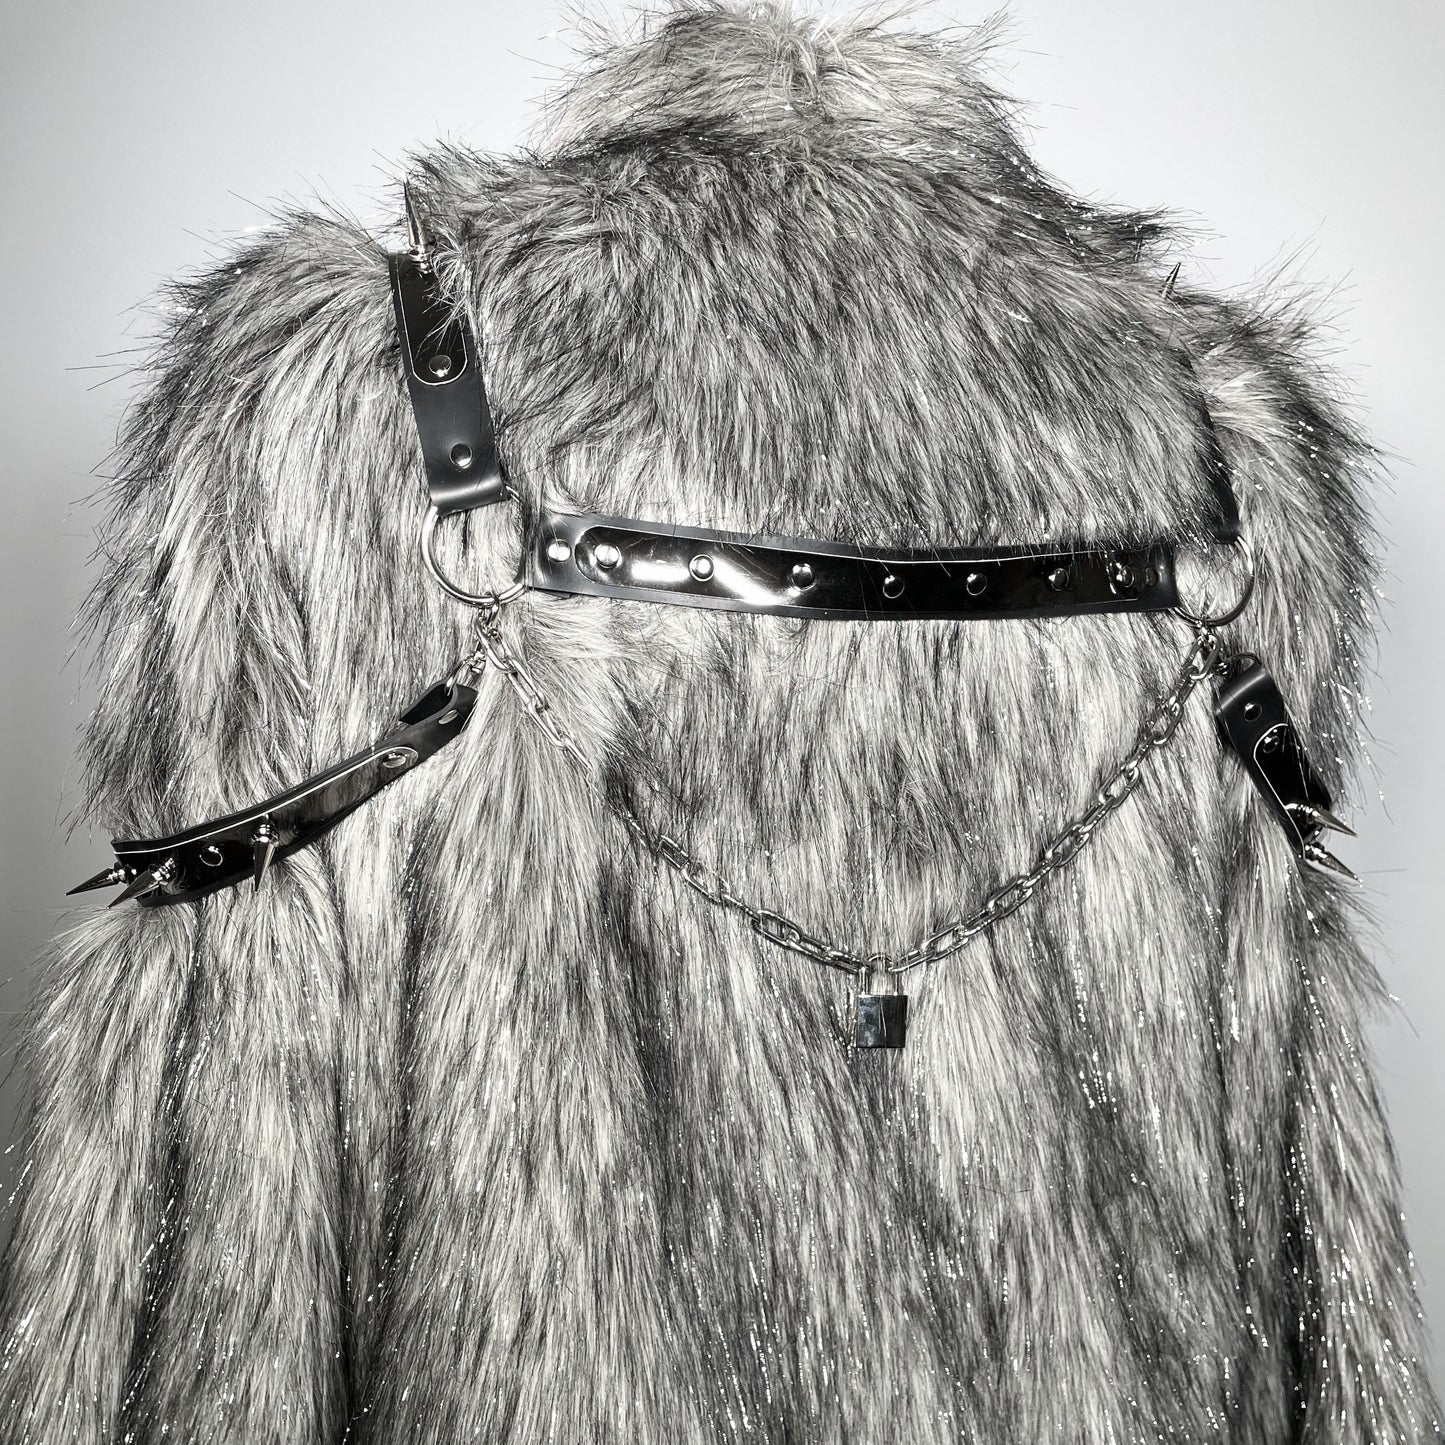 Grey with Silver Tinsel, Silver and Black Spiked Shoulder Harness Faux Fur Jacket